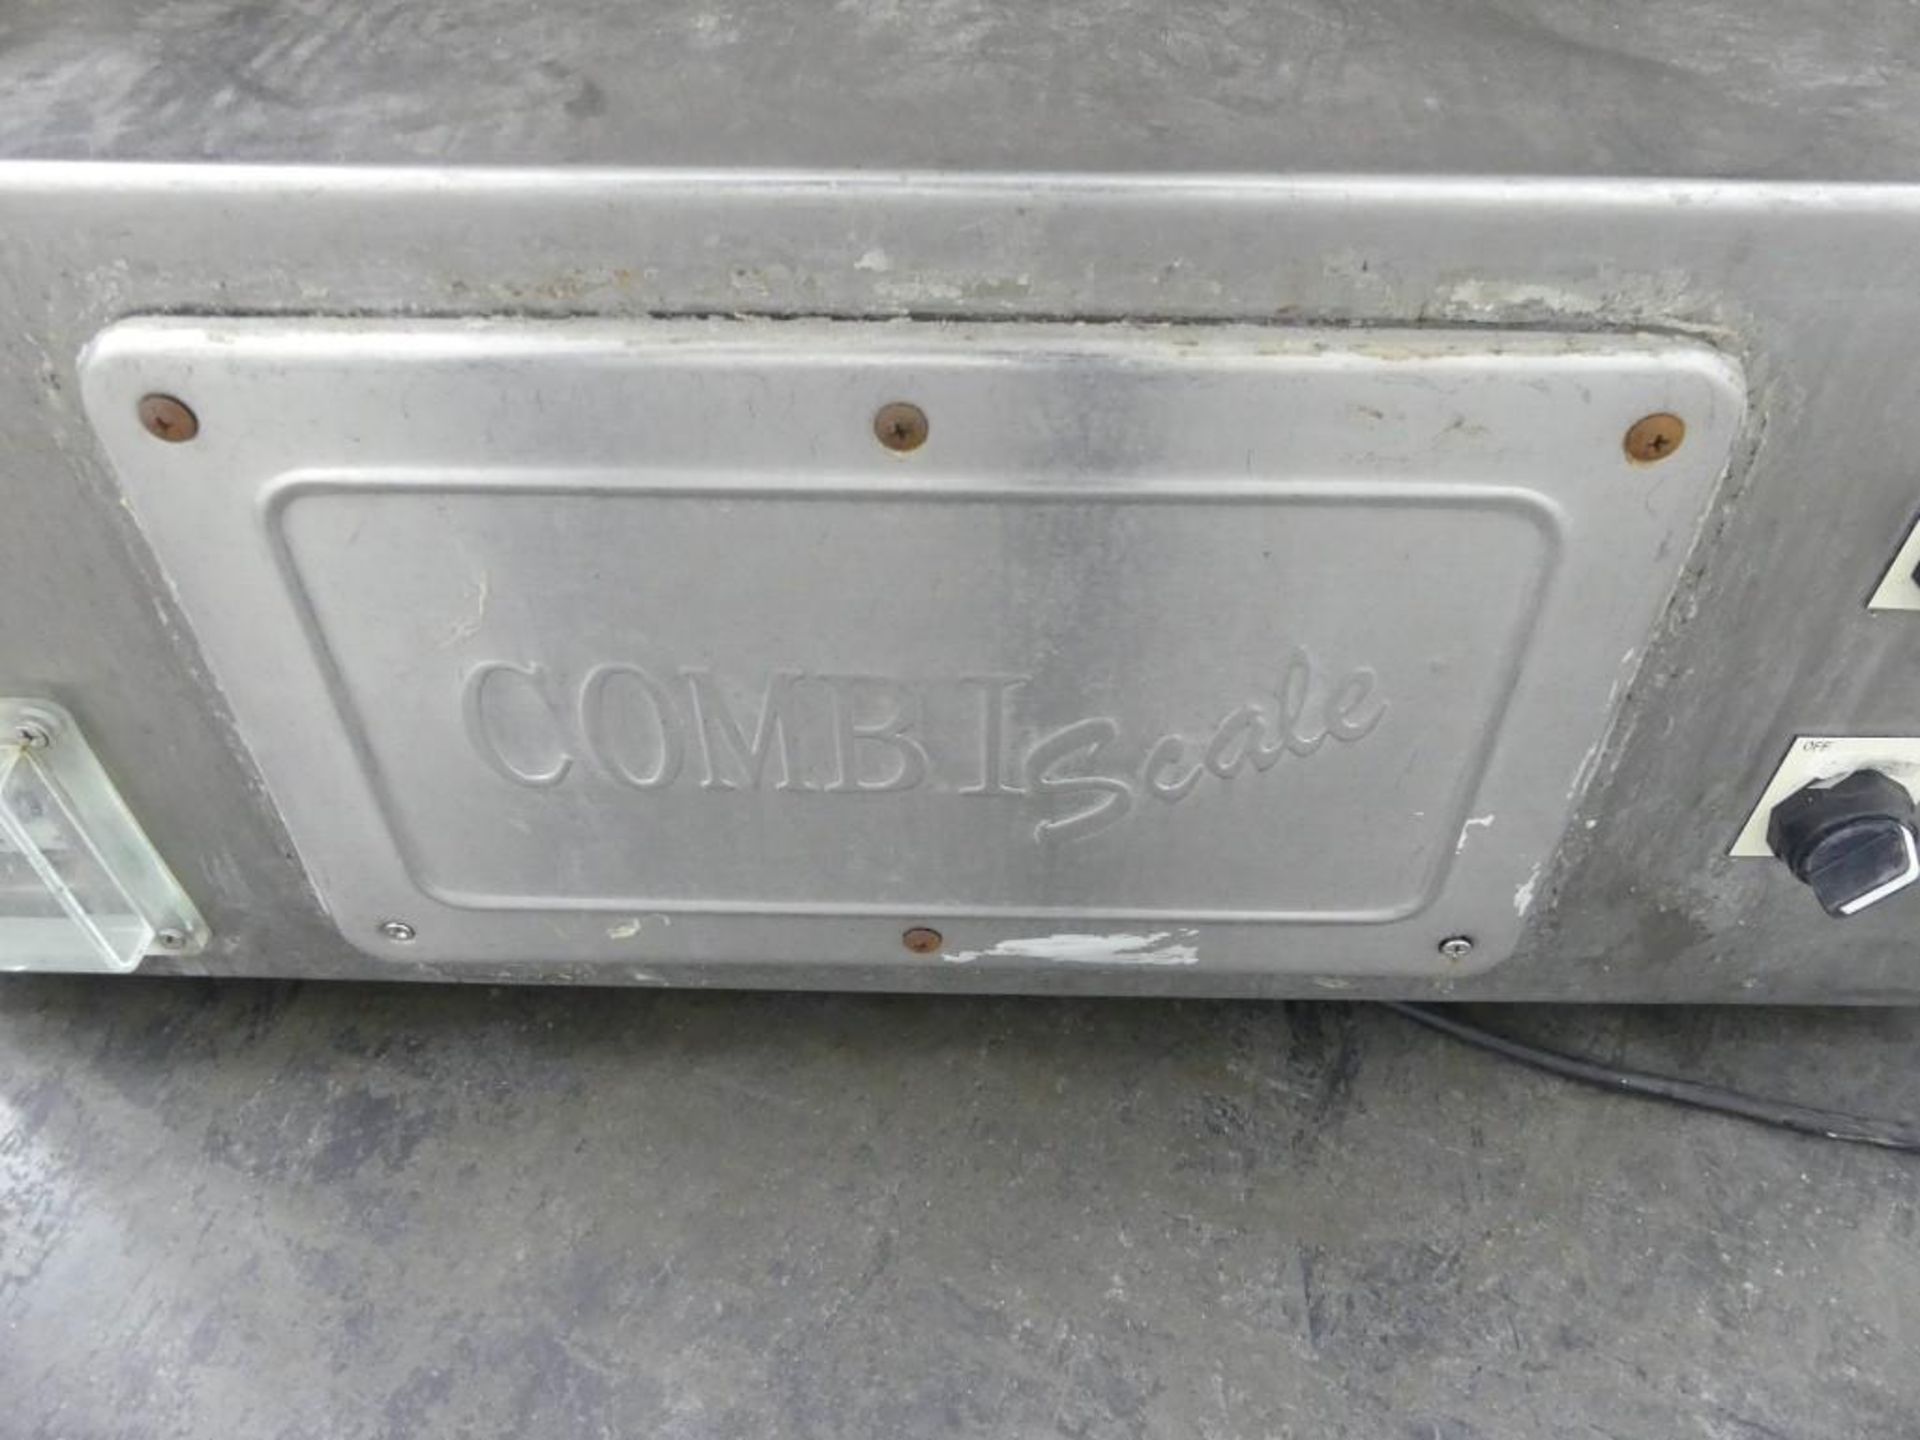 Combi 14 Head Dimpled Bucket Combination Scale - Image 7 of 16